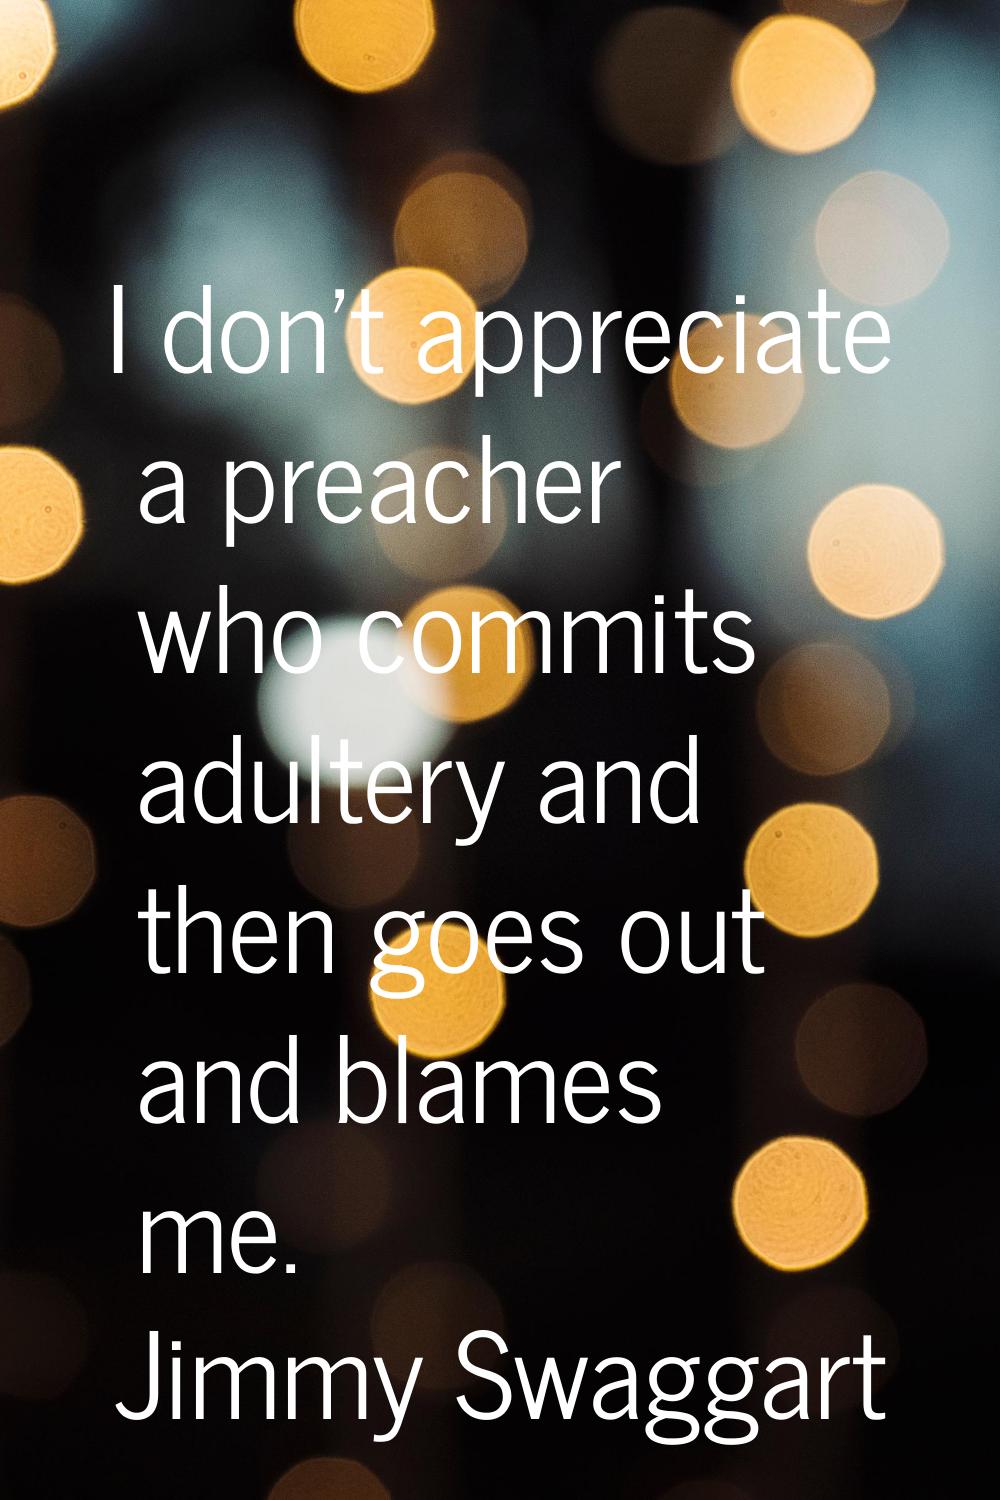 I don't appreciate a preacher who commits adultery and then goes out and blames me.